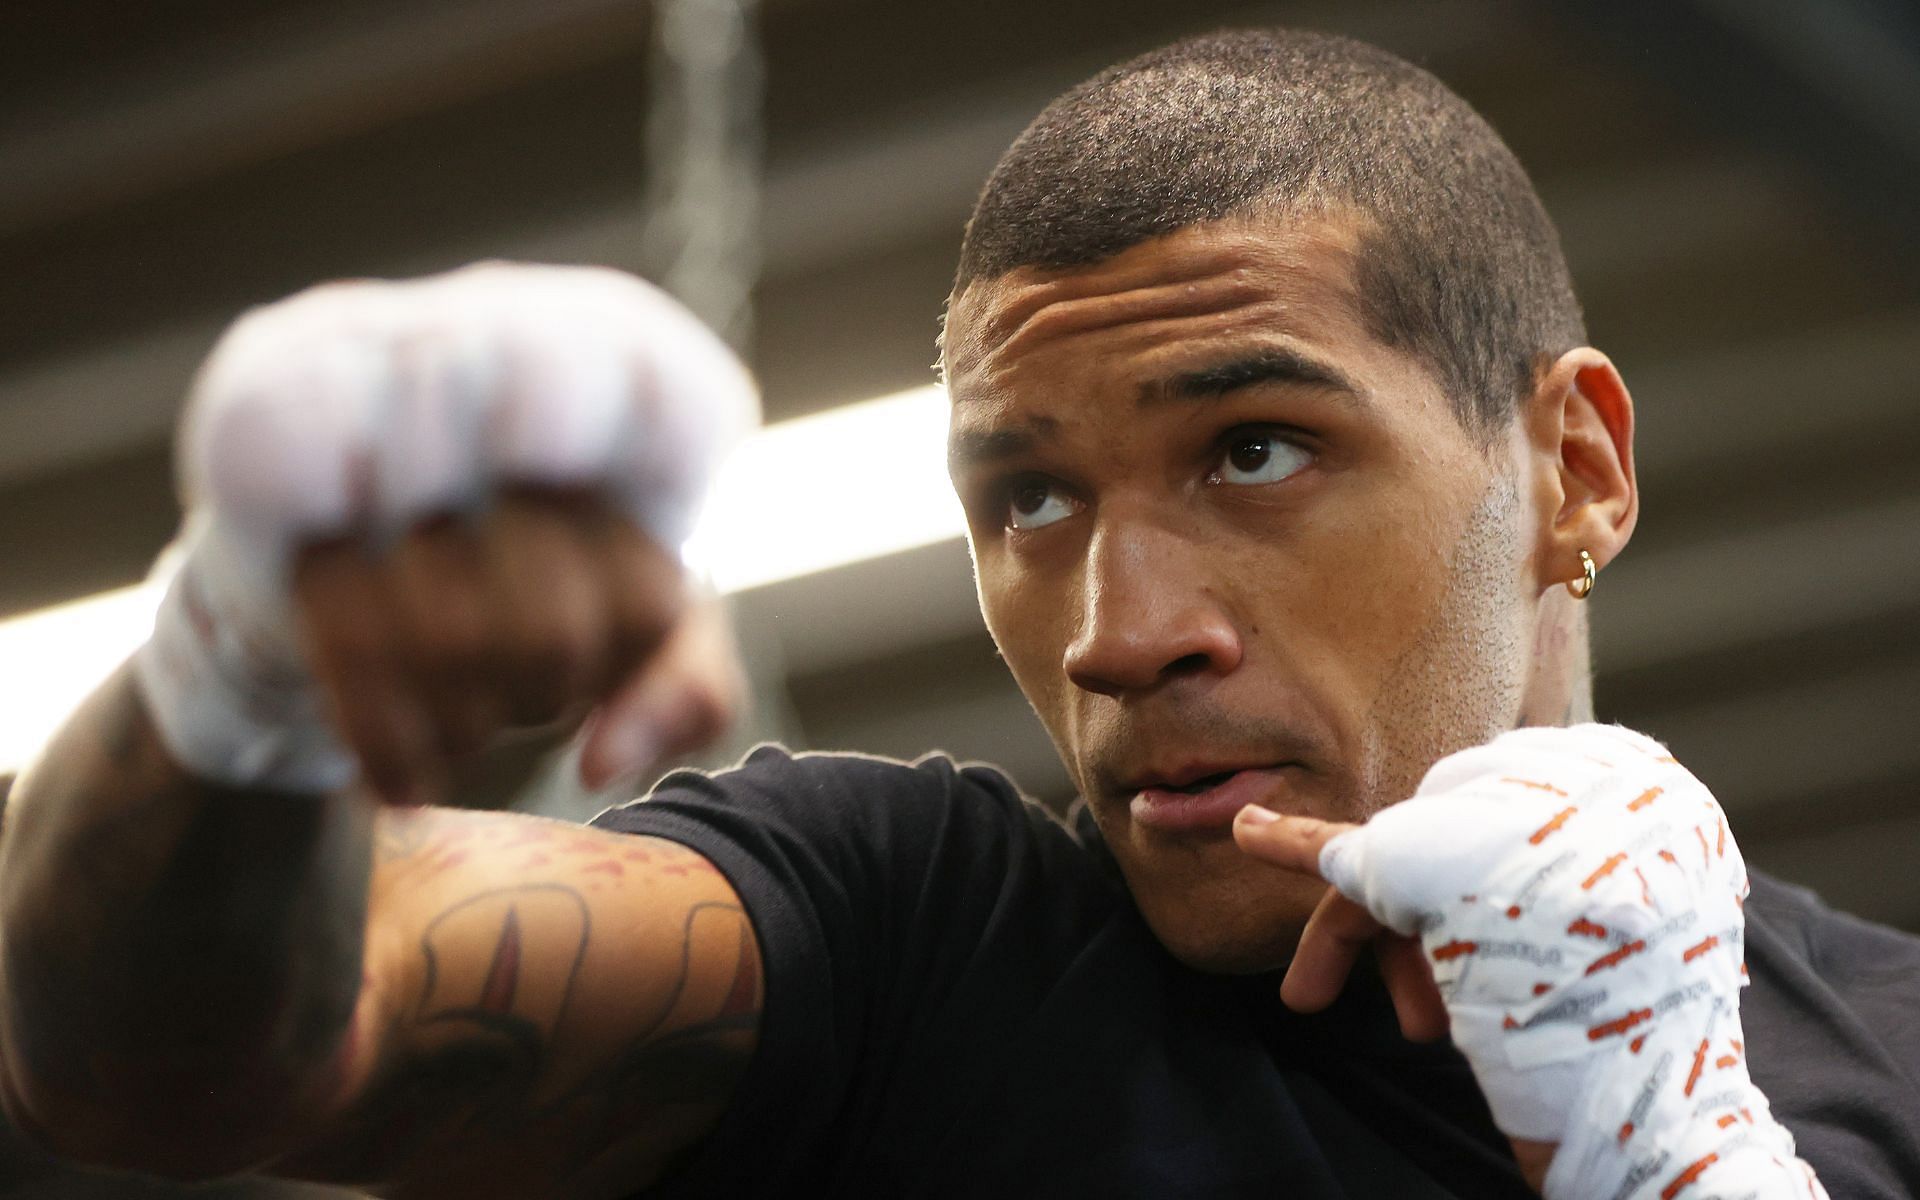 Conor Benn has time and again refuted the PED use allegations levied against him [Image courtesy: Getty Images]